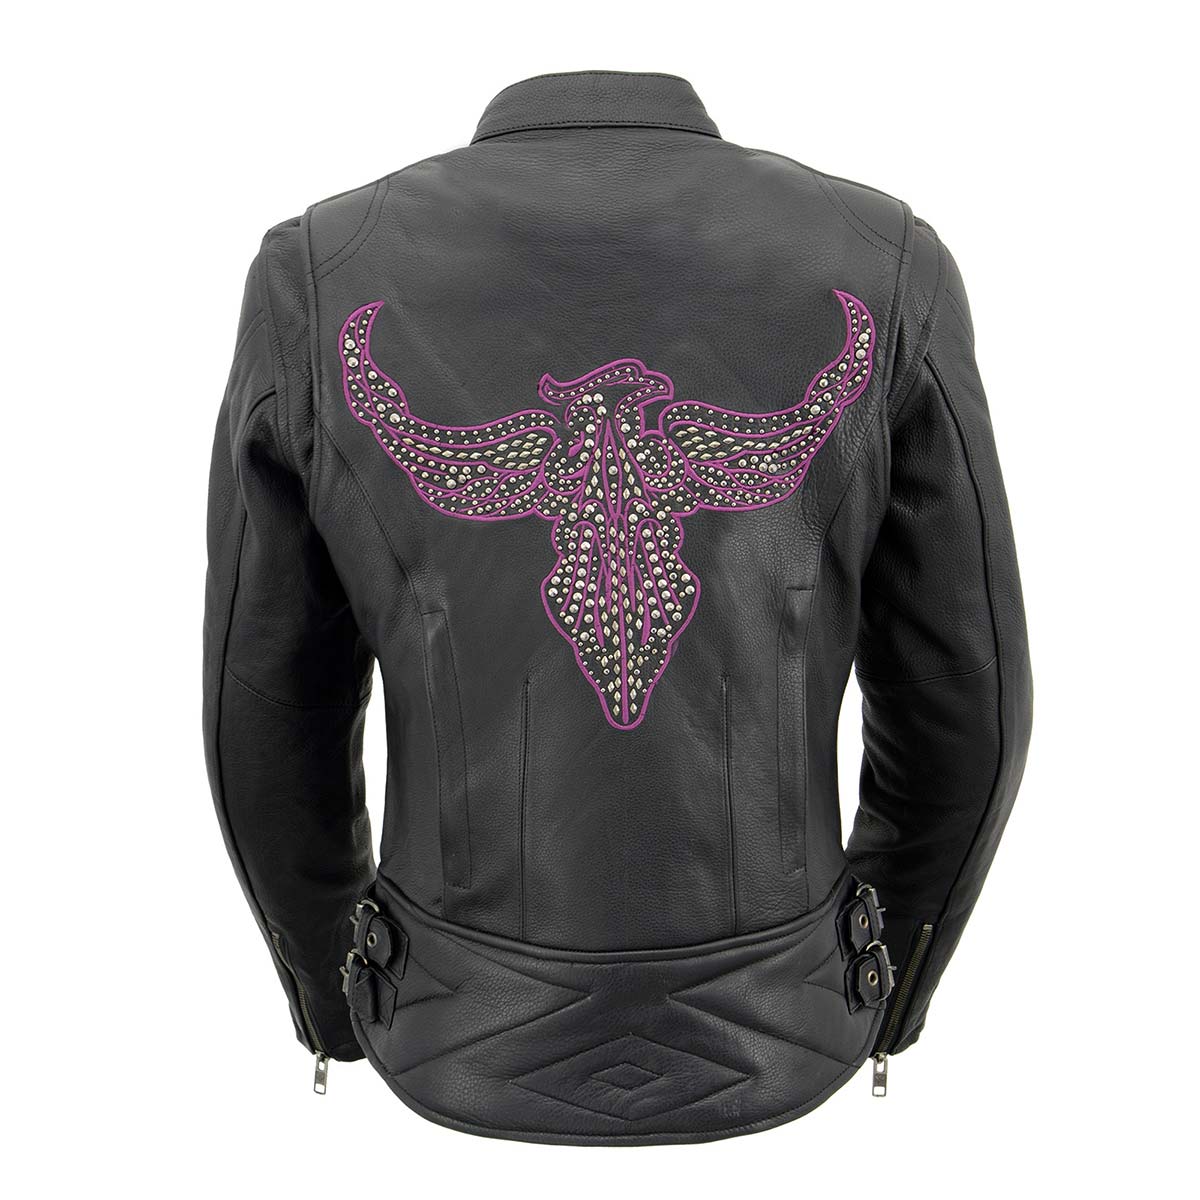 Milwaukee Leather MLL2570 Women's 'Phoenix Embroidered' Black and Fuchsia Pink Leather Motorcycle Jacket